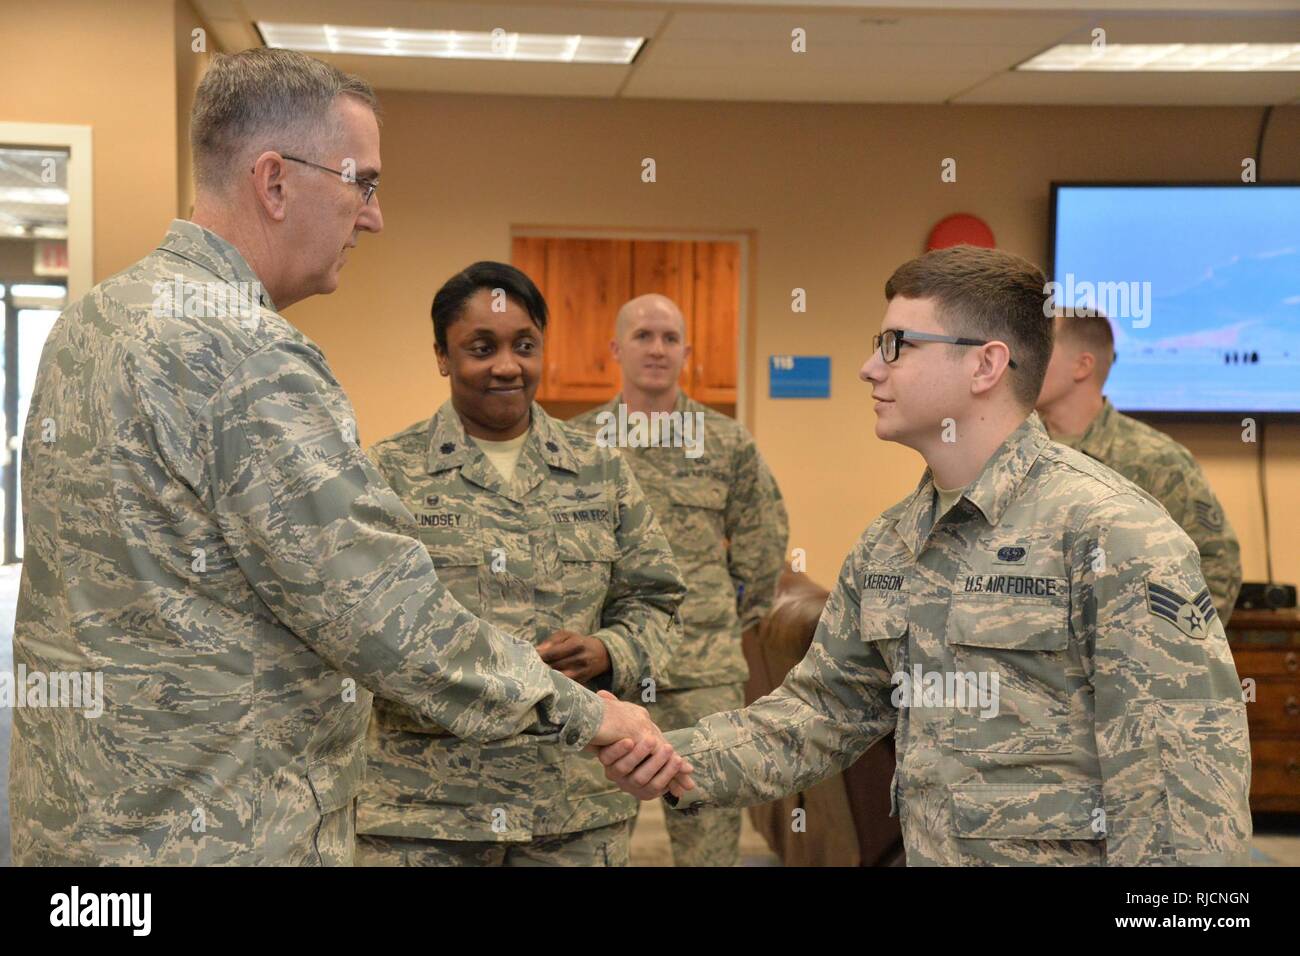 U.S. Air Force Gen. John Hyten, commander of U.S. Strategic Command (USSTRATCOM); shakes hands with Senior Airman Landon Wilkerson, 341st Communications Squadron, at the Malmstrom Air Force Base resiliency center in Montana, Jan. 16, 2018. During his visit, Hyten met with base leaders and airmen to thank them for their support to USSTRATCOM’s deterrence mission. He also toured facilities at the base, including the weapons storage area and a missile alert facility. Stock Photo